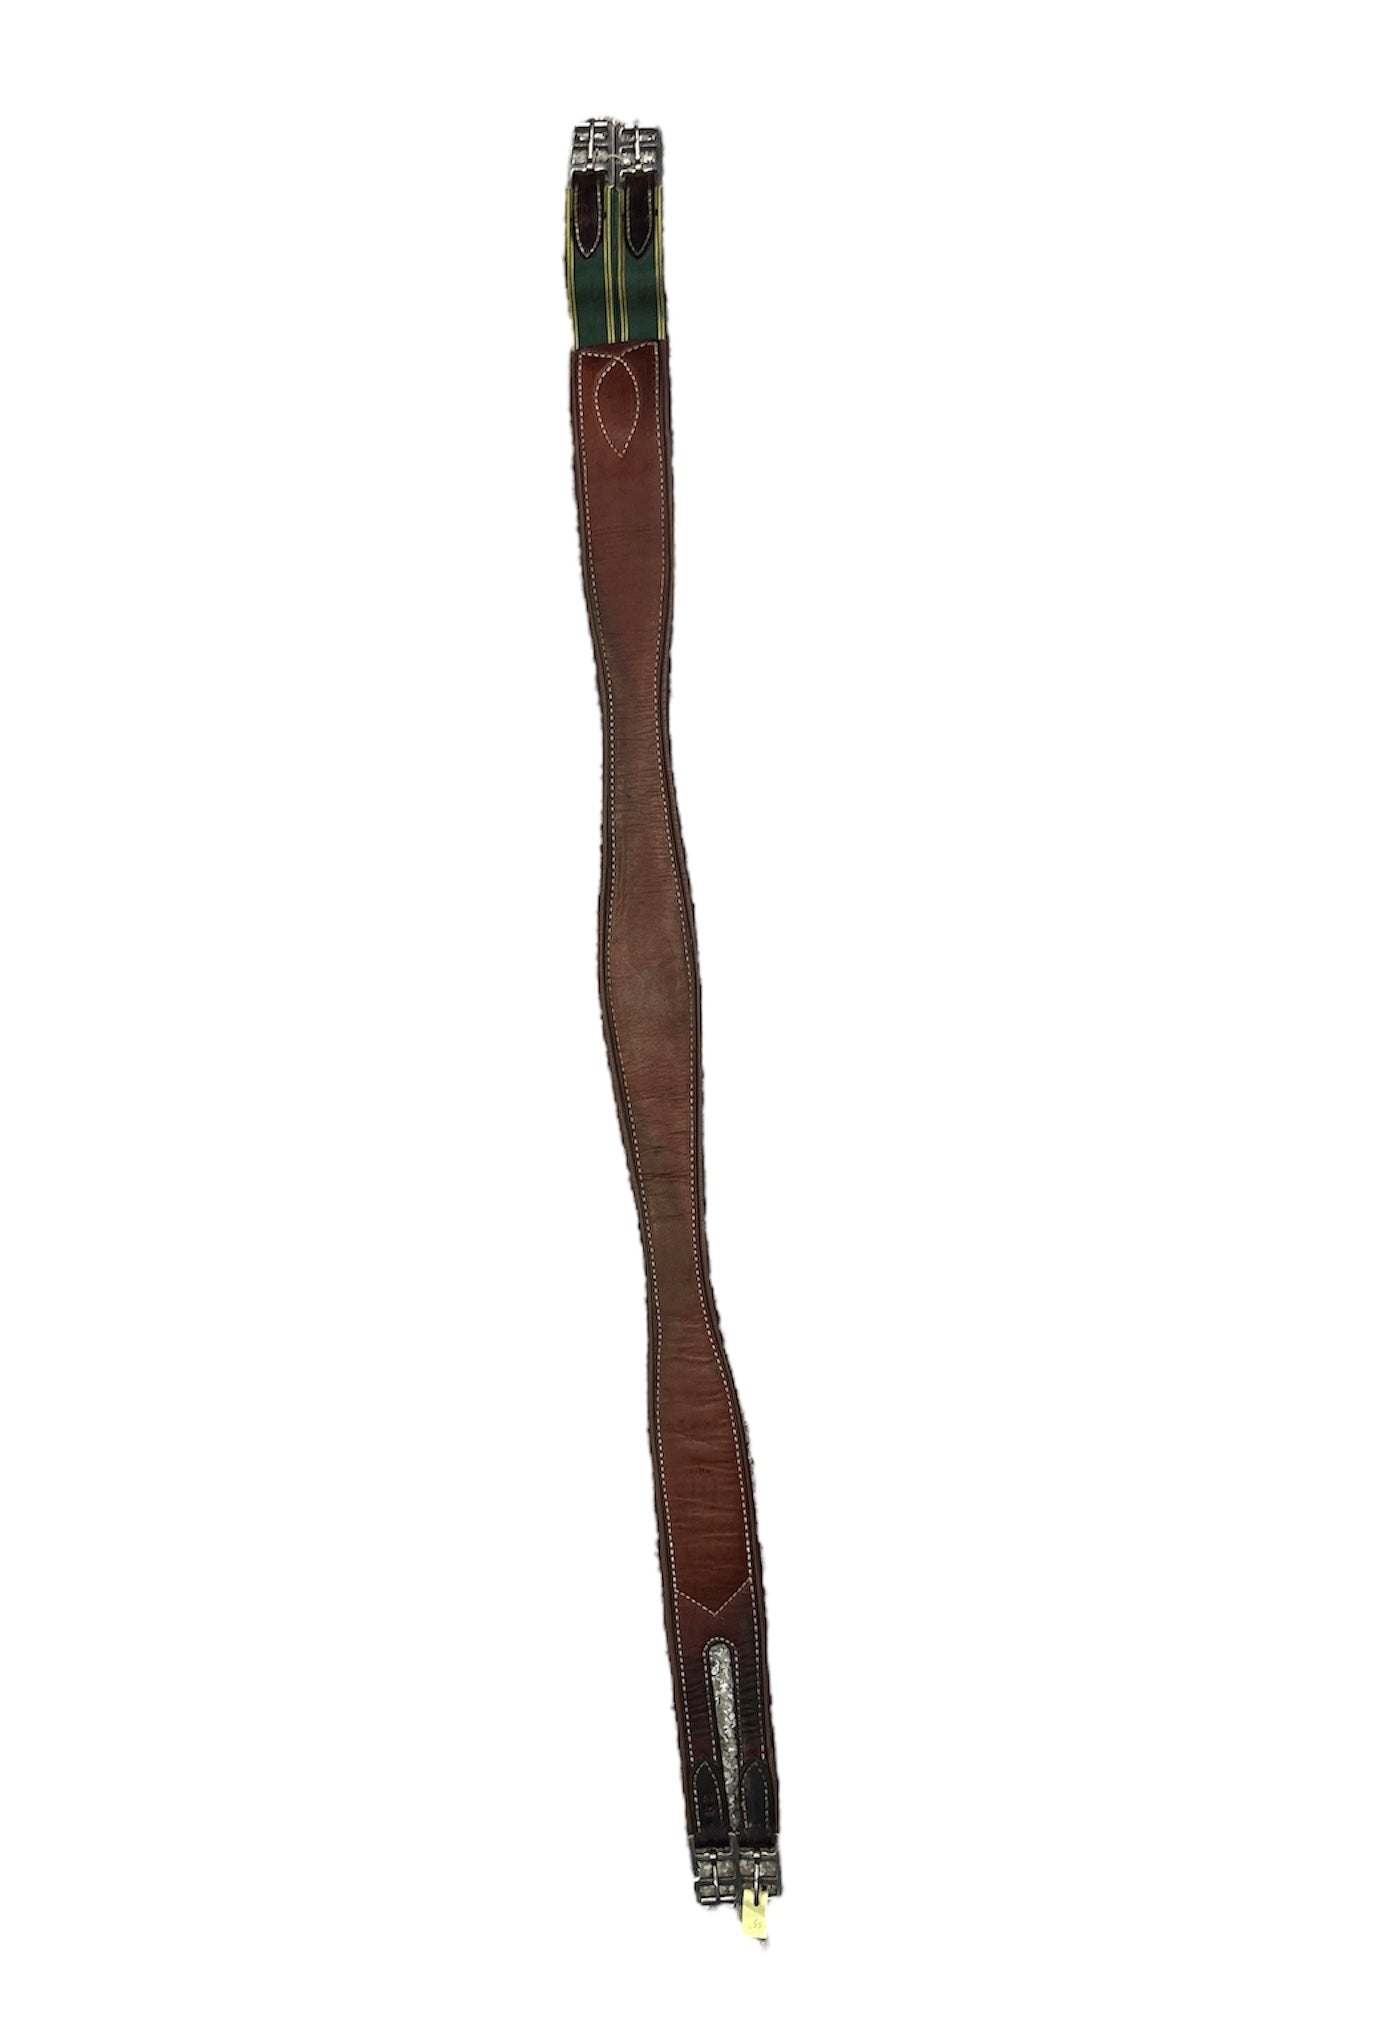 KHS EXCHANGE stitched leather girth